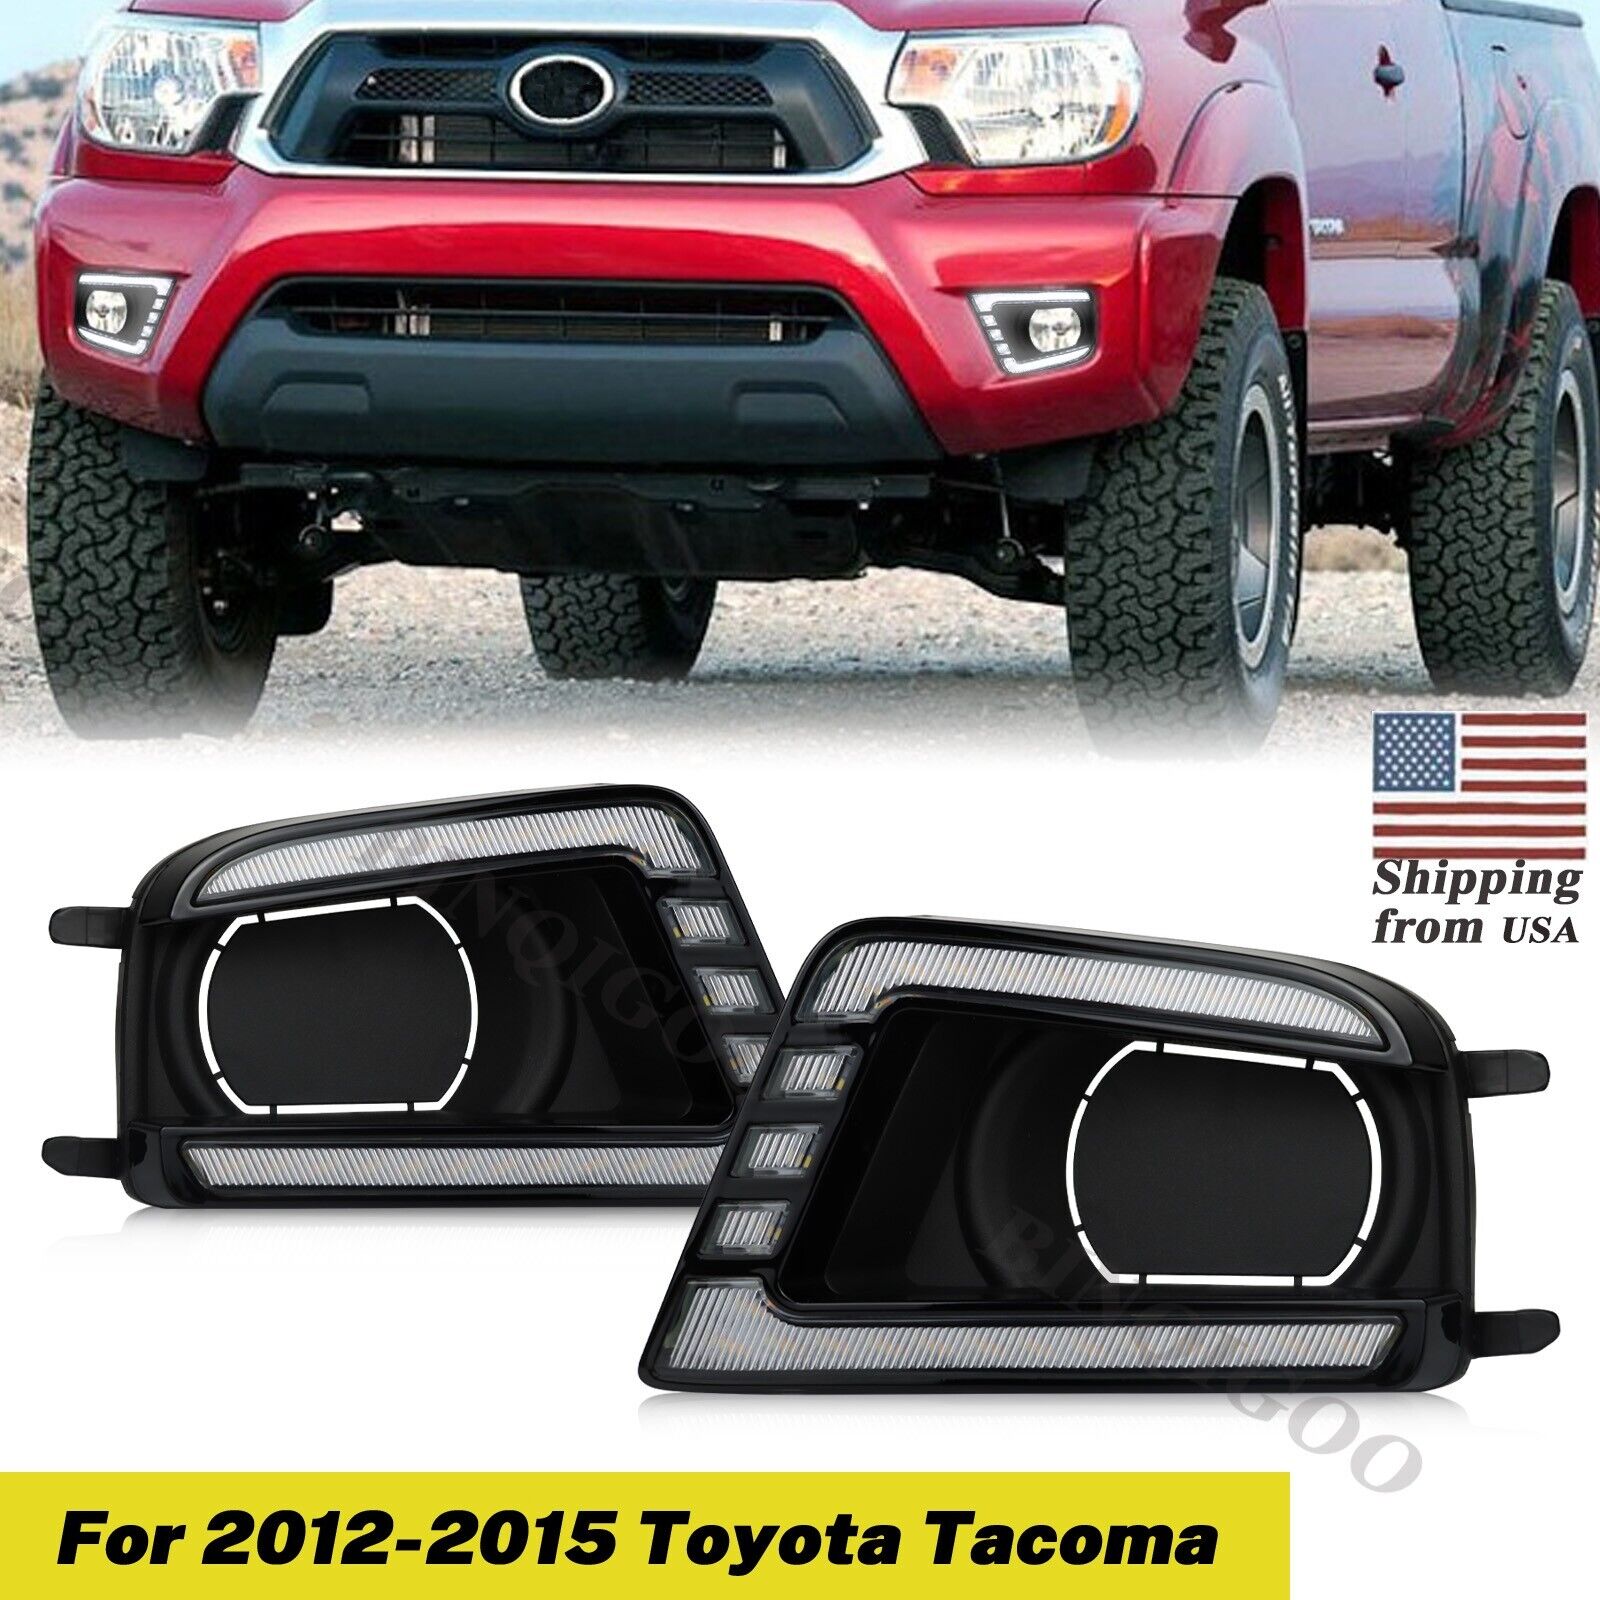 For TOYOTA TACOMA 2012 2013 2014 2015 LED Fog Lights Driving Lamps w/ Amber Turn